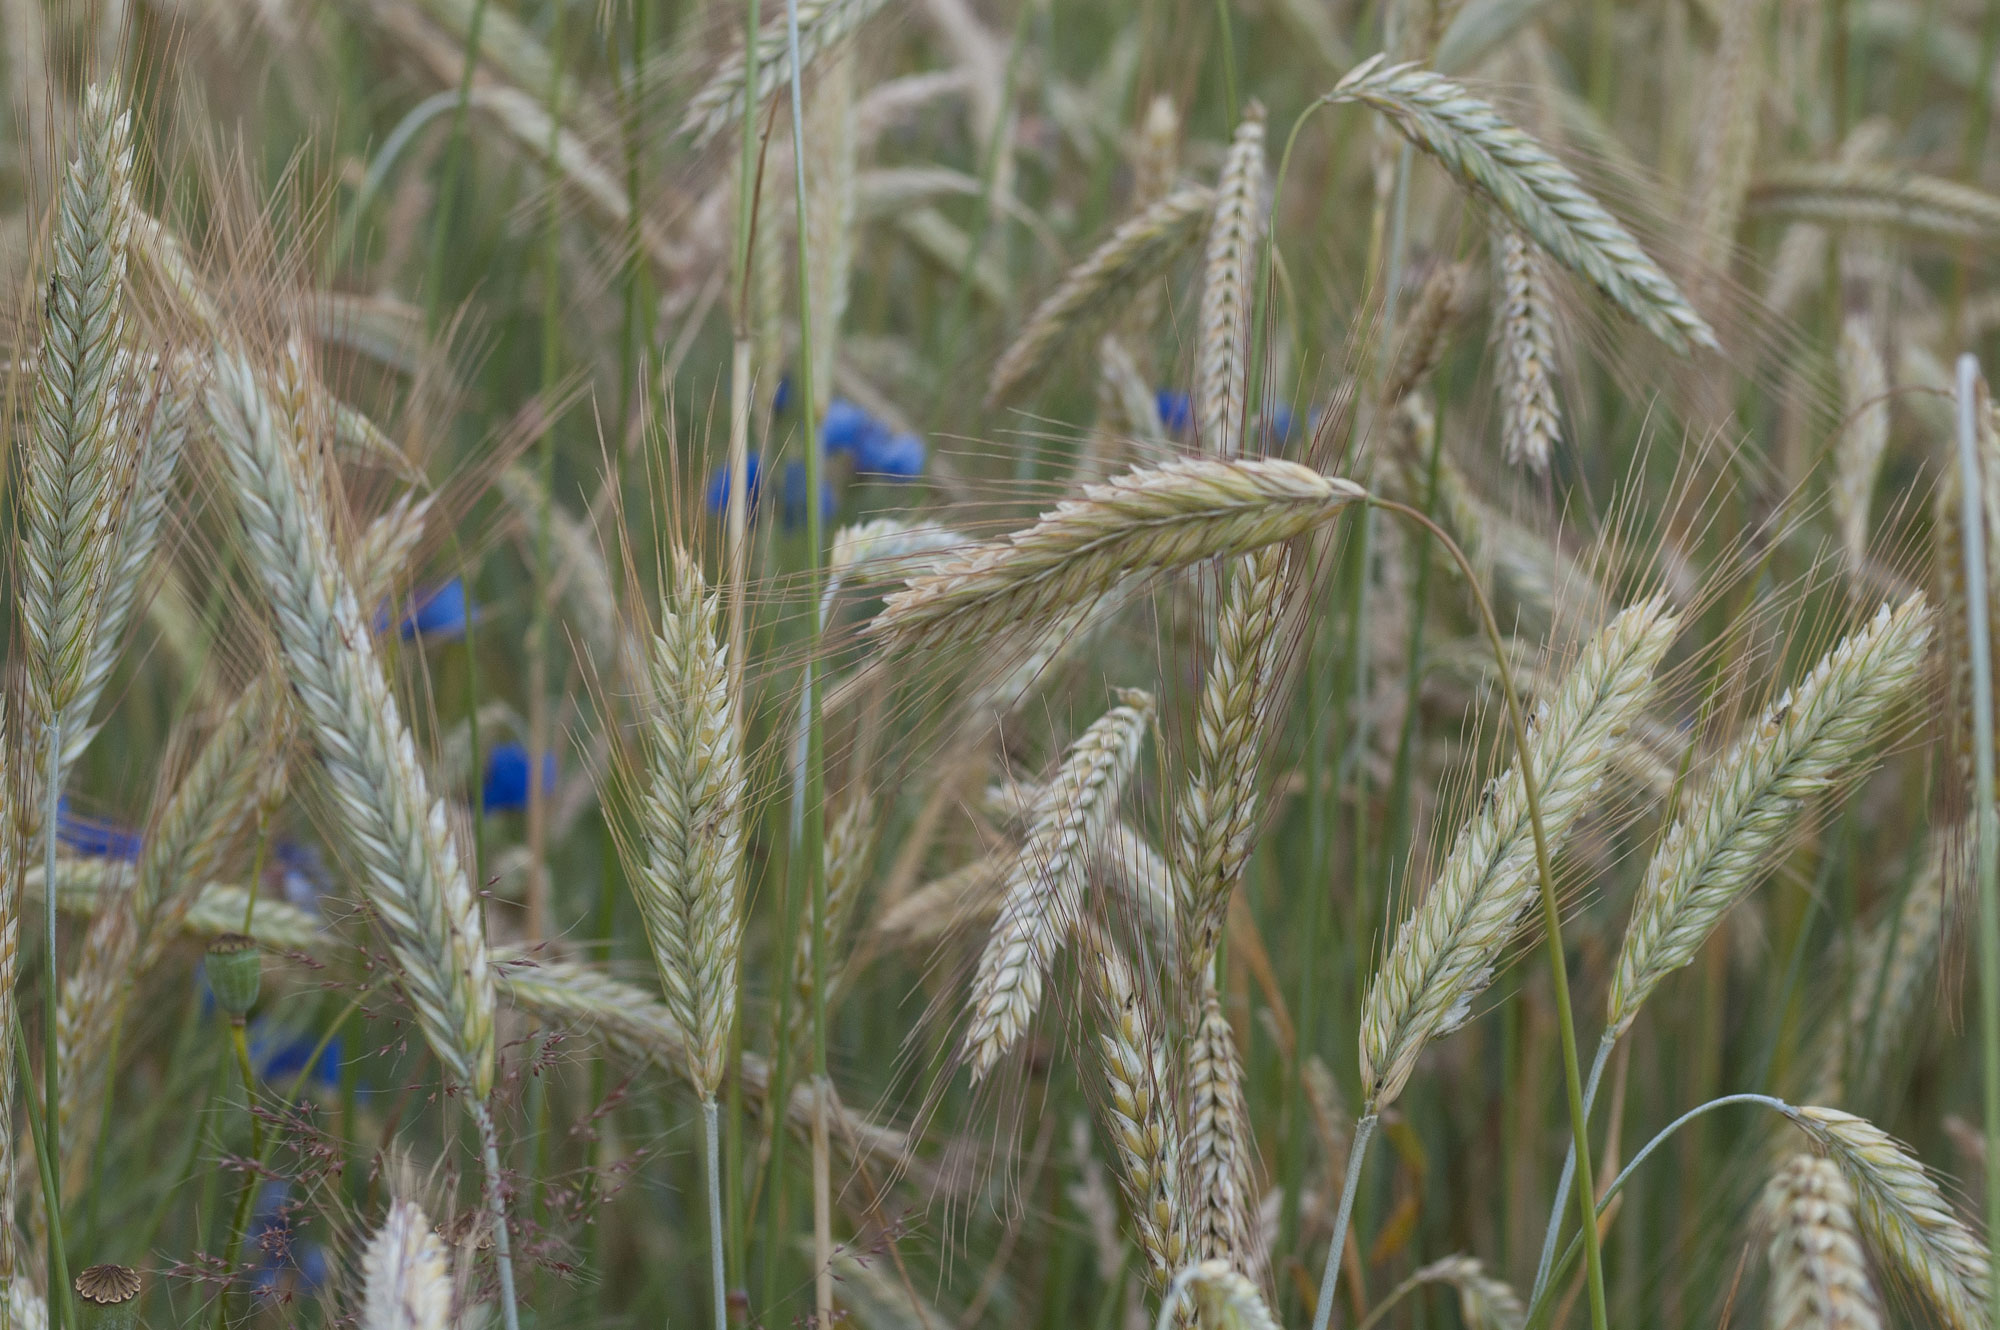 Photograph of a field of winter rye showing rye ears. Blue flowering can be seen out of focus in the background.